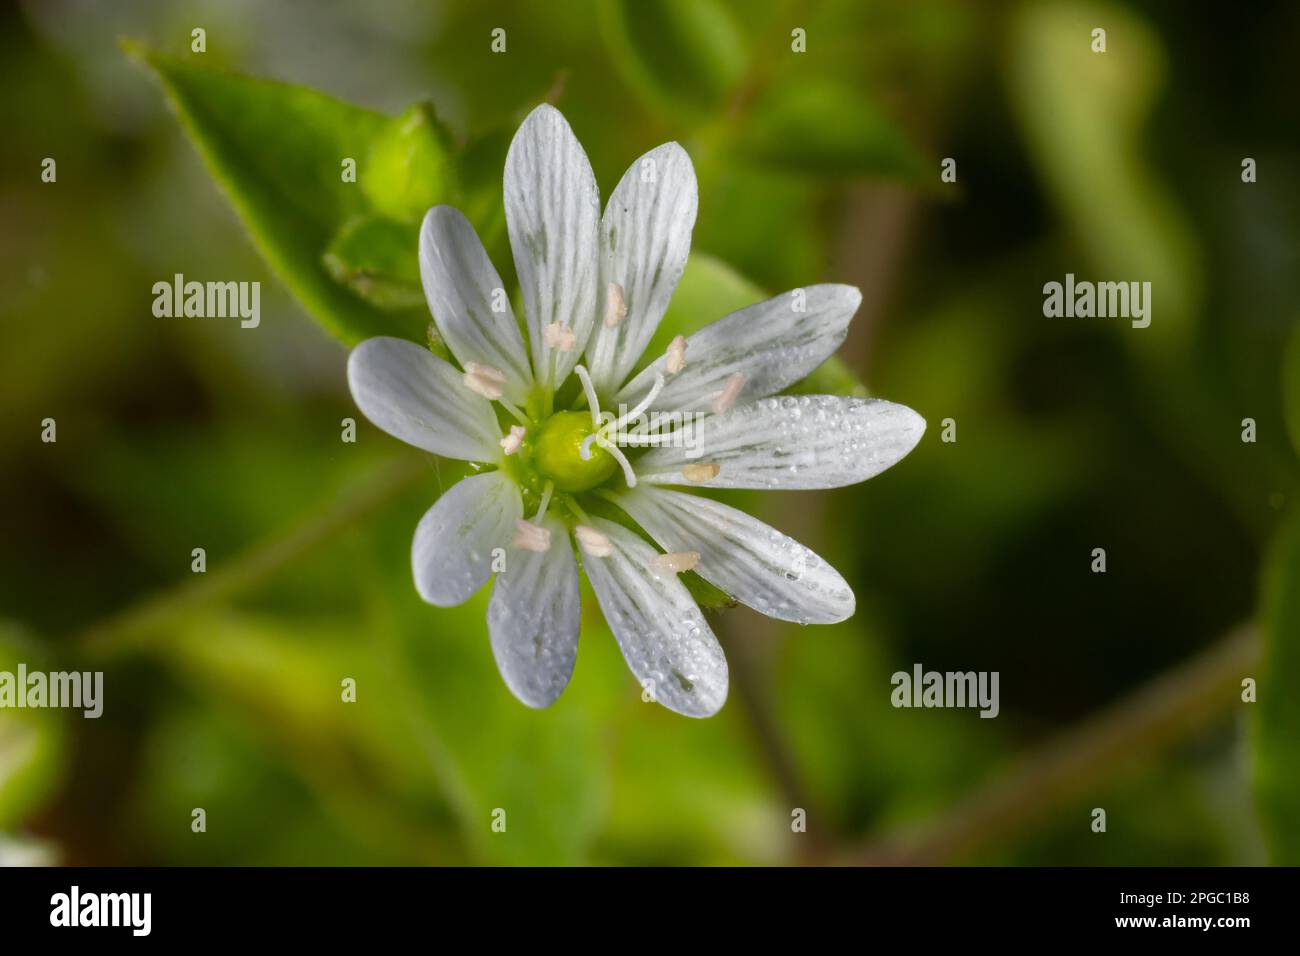 common chickweed, Stellaria media, white bloom with green blurred background. Stock Photo